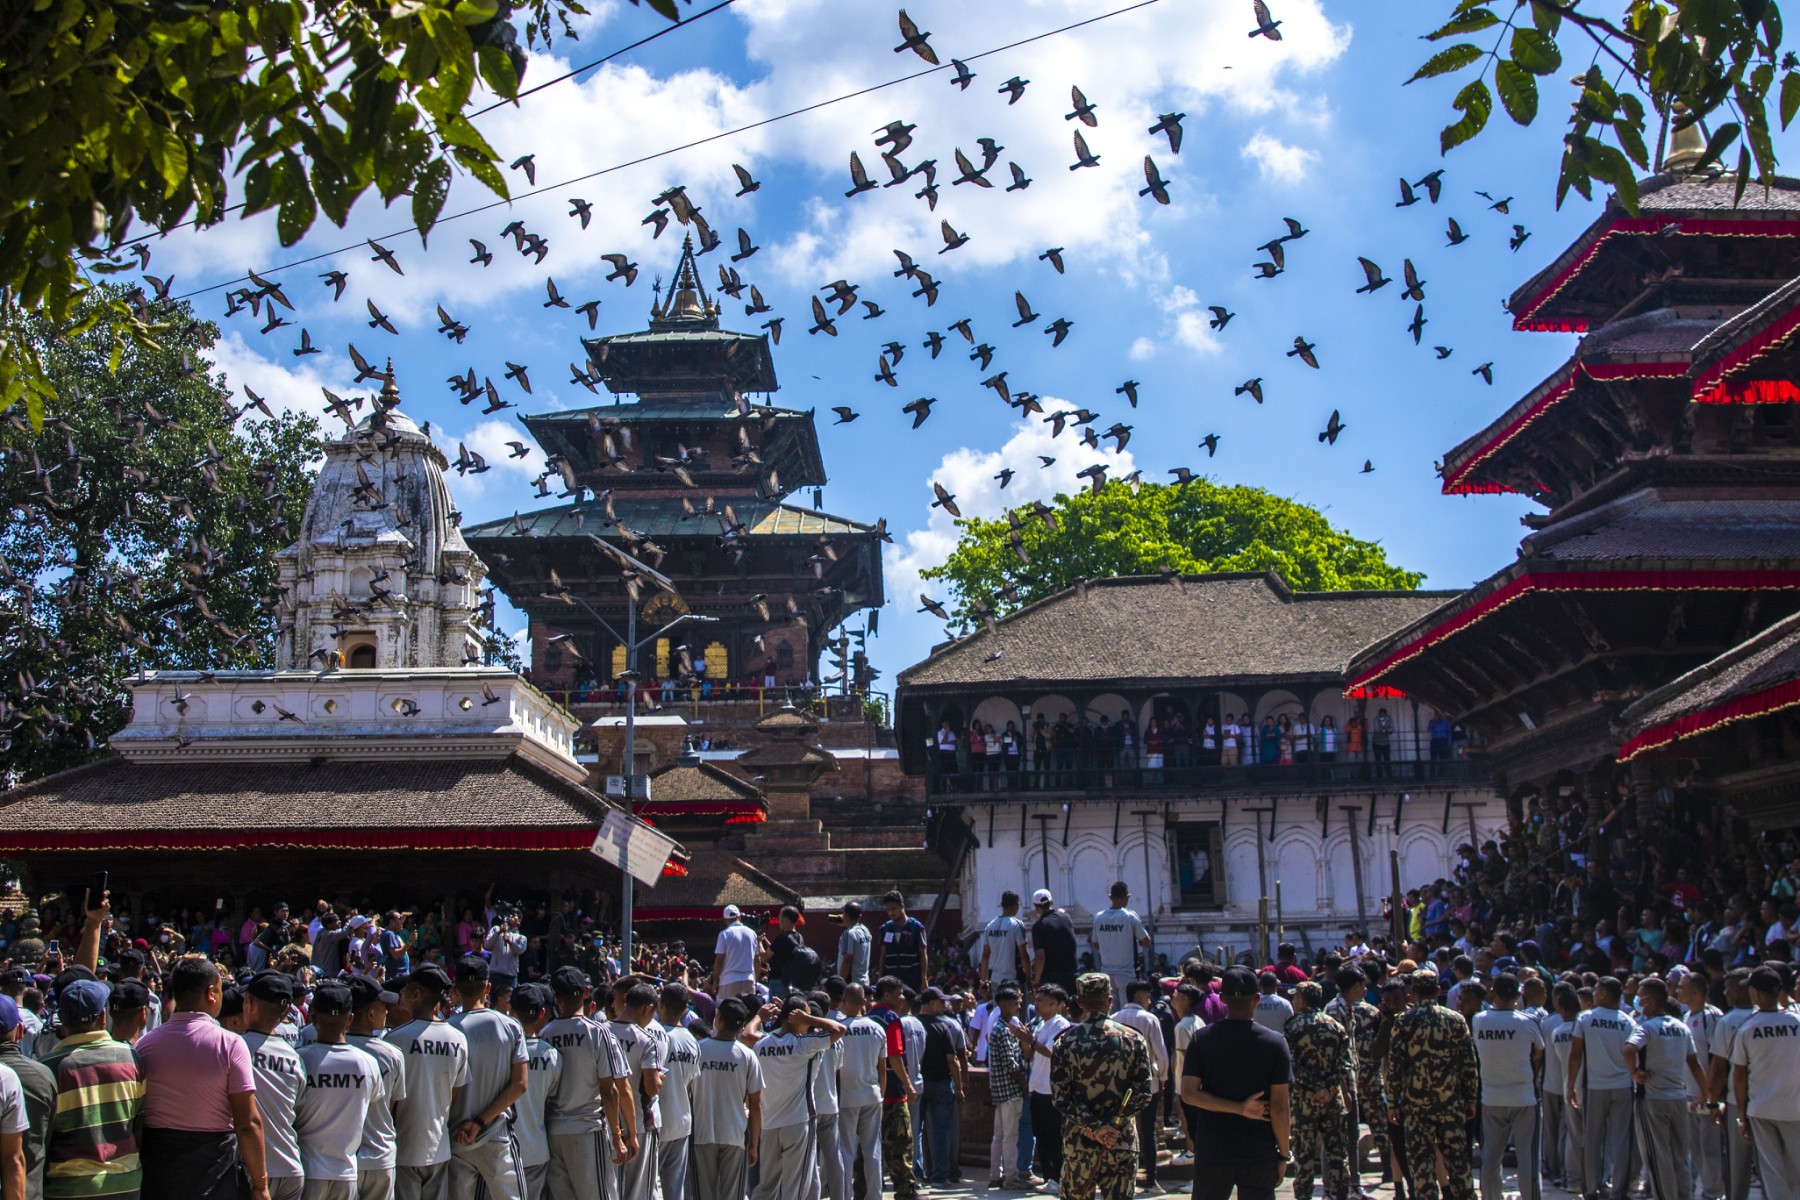 In Pictures: Indra Jatra commences with the erection of lingo at Hanumandhoka